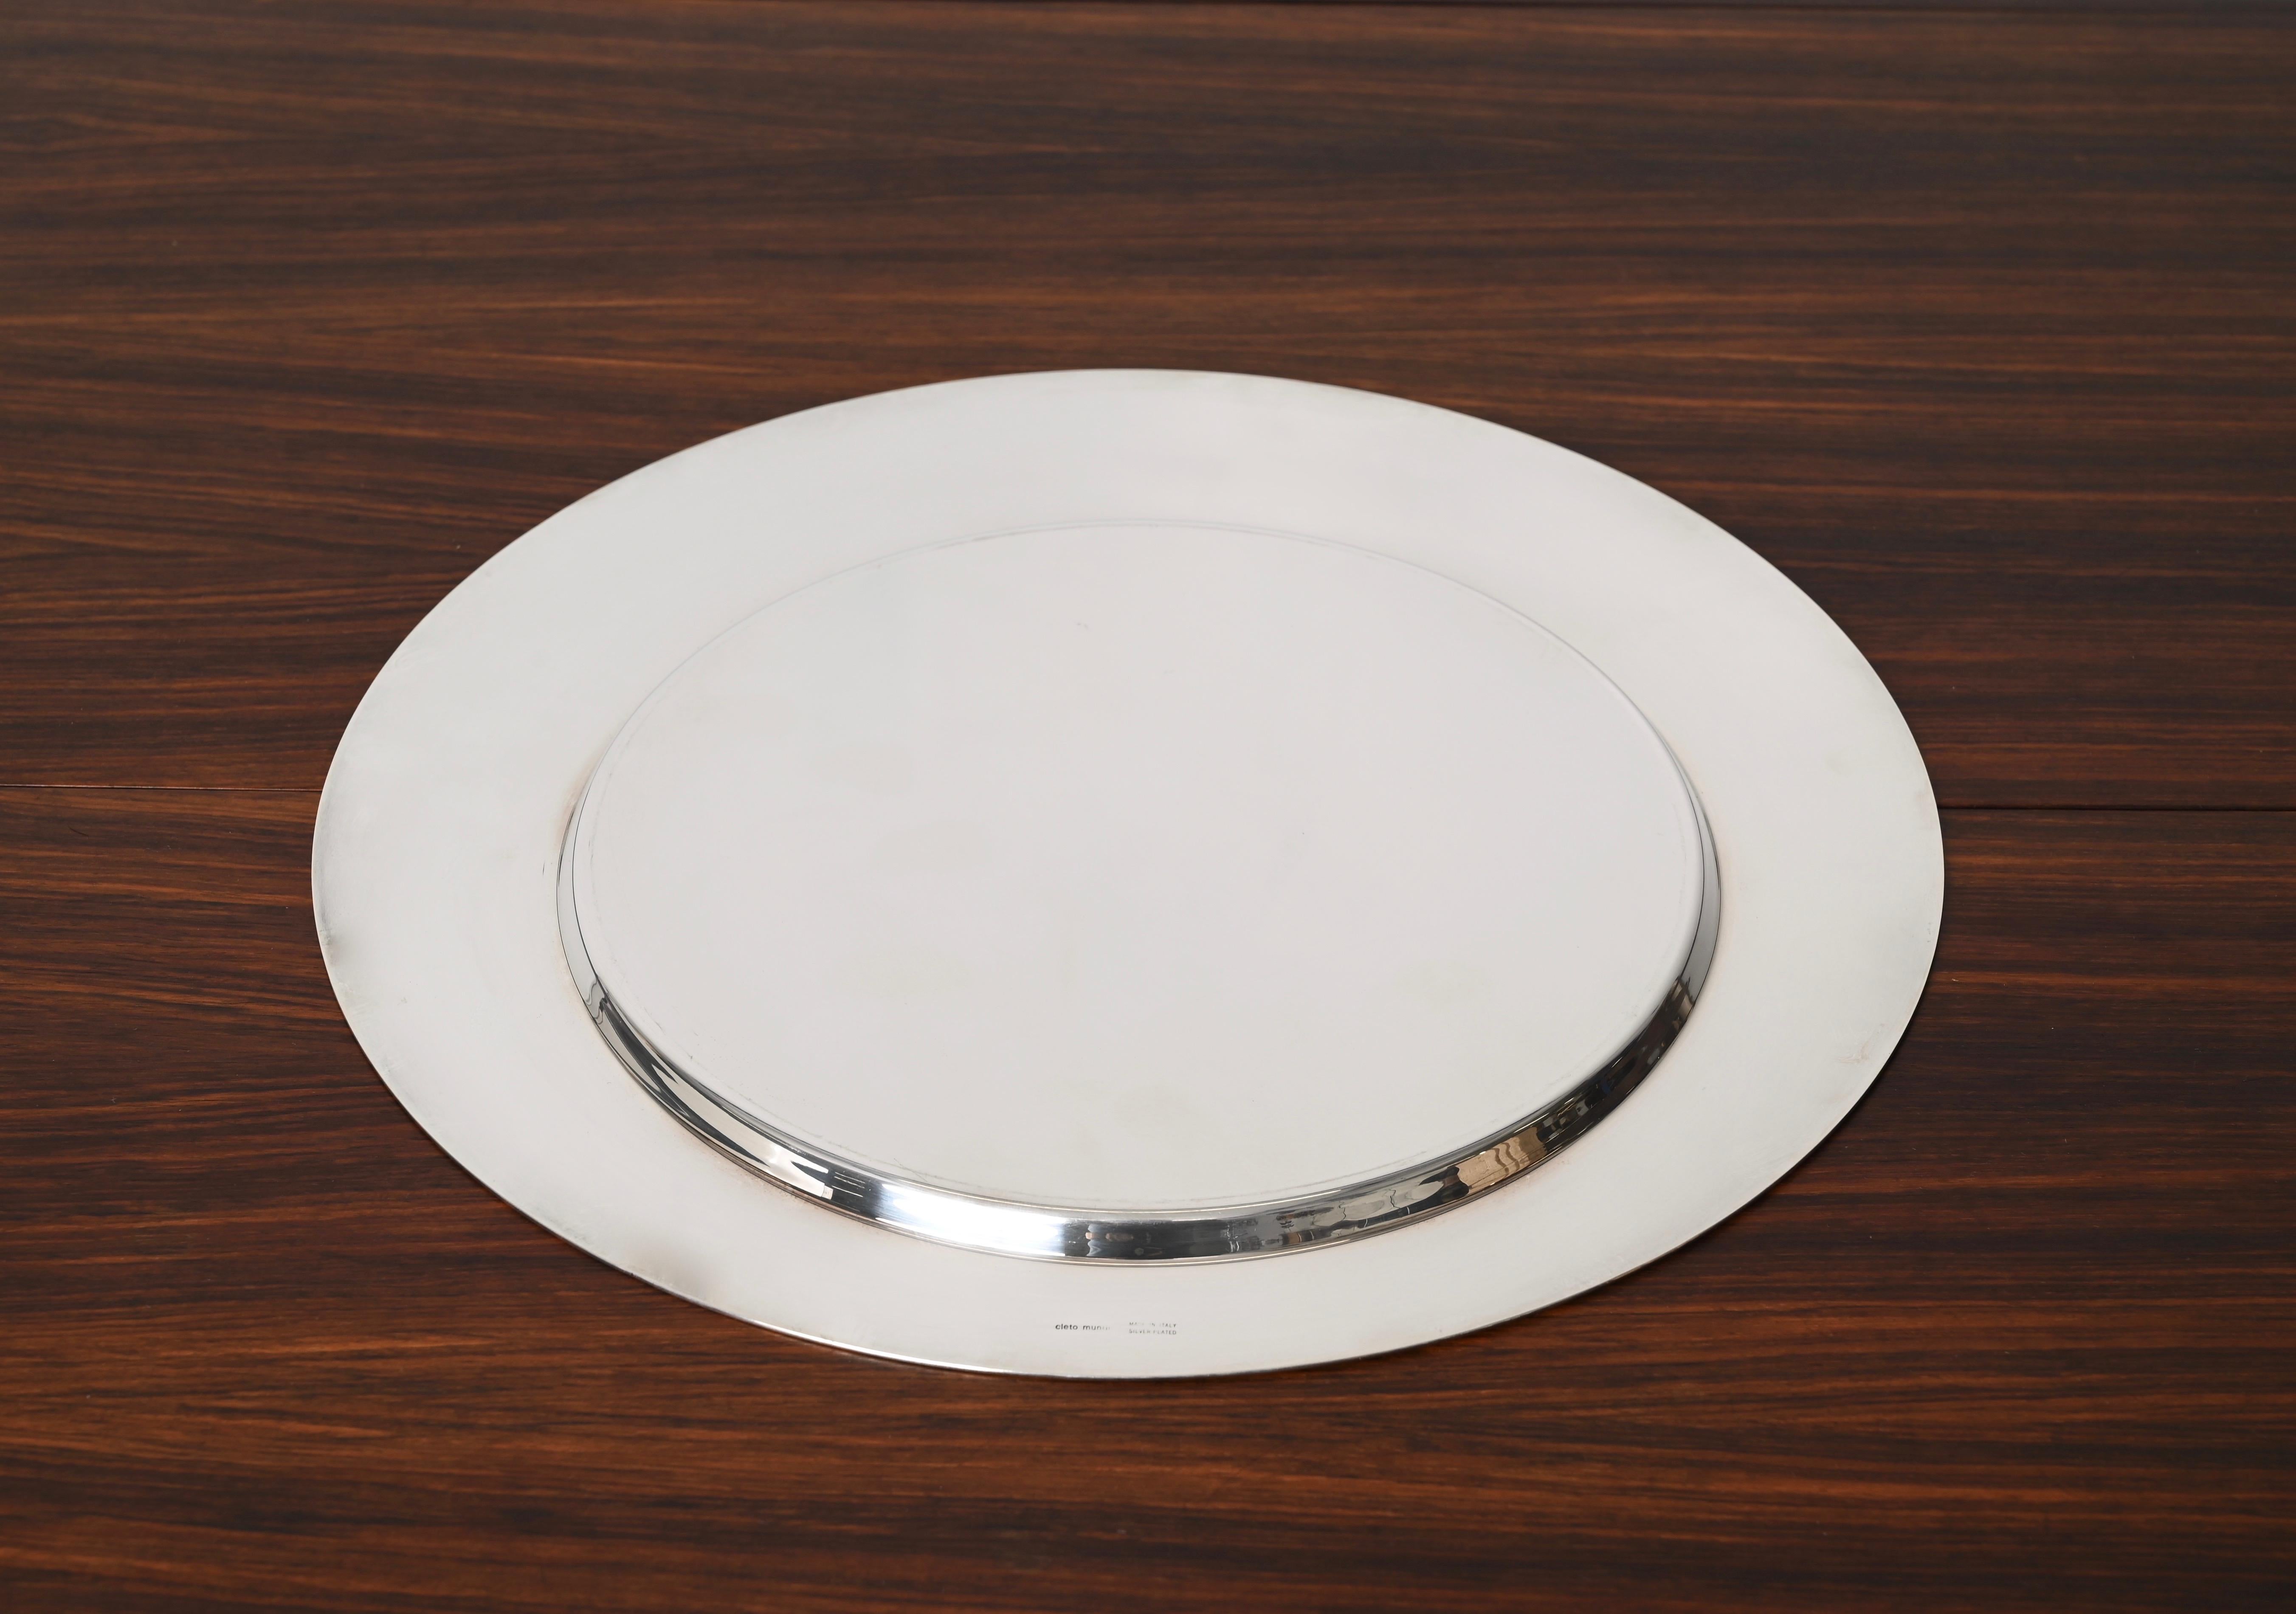 Gio Ponti for Cleto Munari Modernist Silver Plated Serving Plate Italy, 1980s For Sale 1